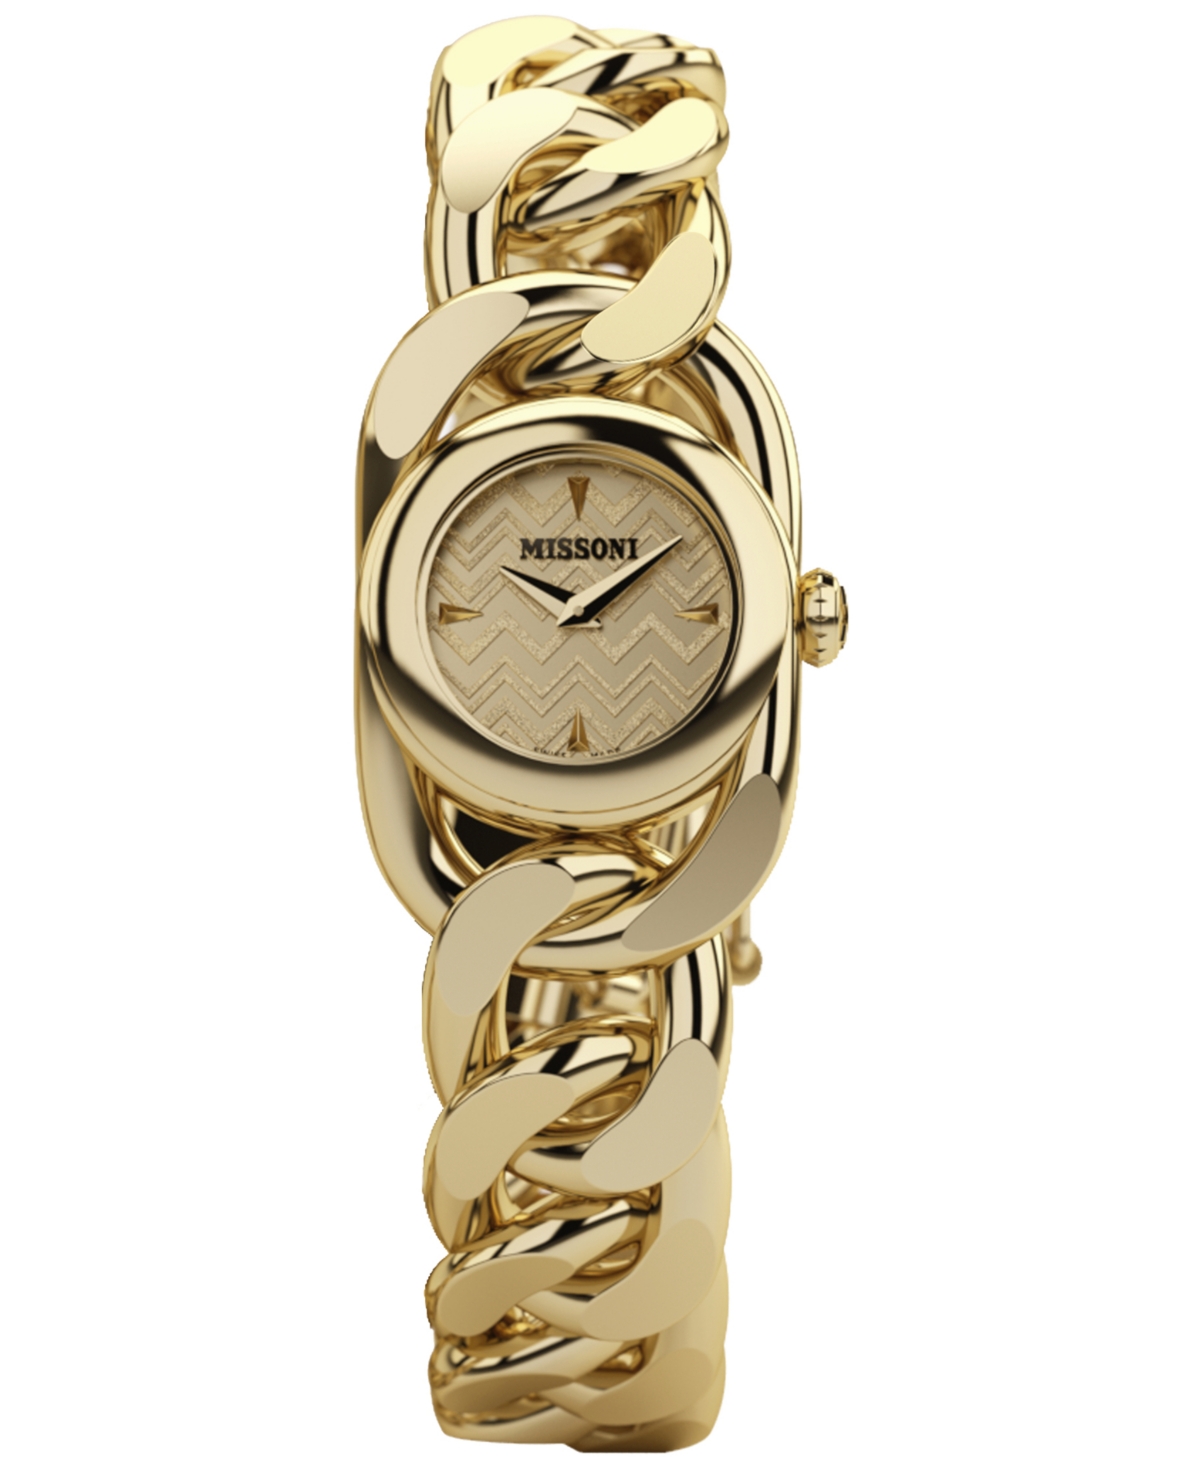 MISSONI WOMEN'S SWISS GIOIELLO GOLD ION-PLATED STAINLESS STEEL BRACELET WATCH 23MM